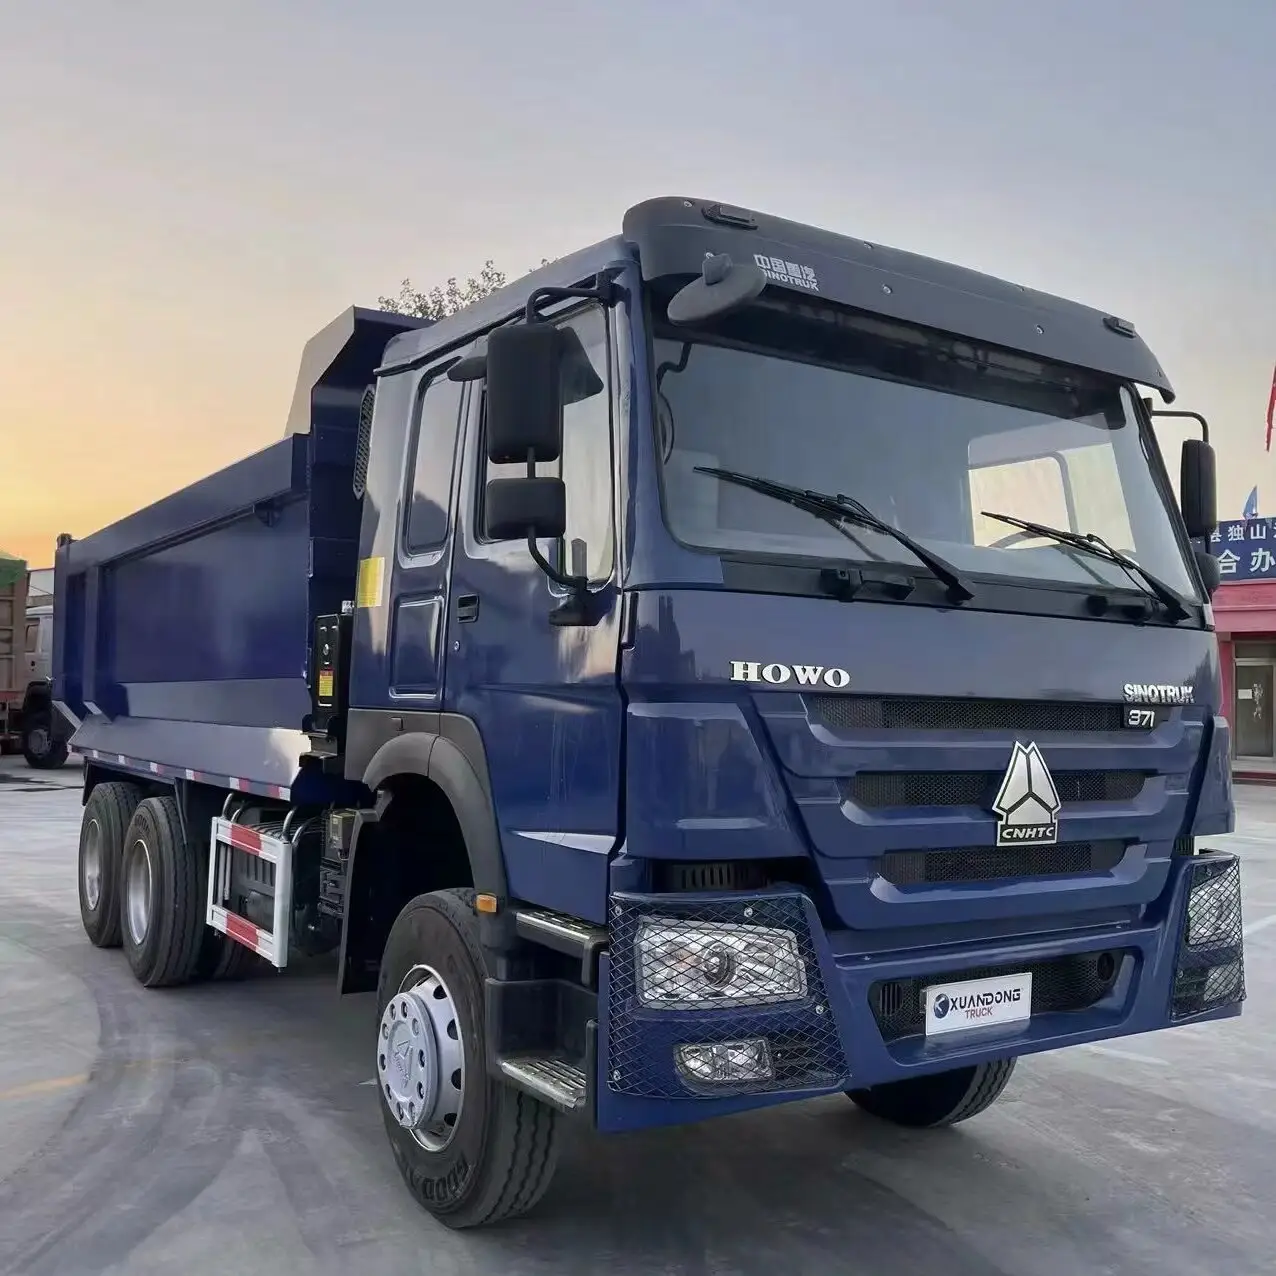 2021 Chinese Used Blue 6x4 10 Wheel 60 Tons 371HP With Lowest Price Good Condition Dumper Truck For Sale.